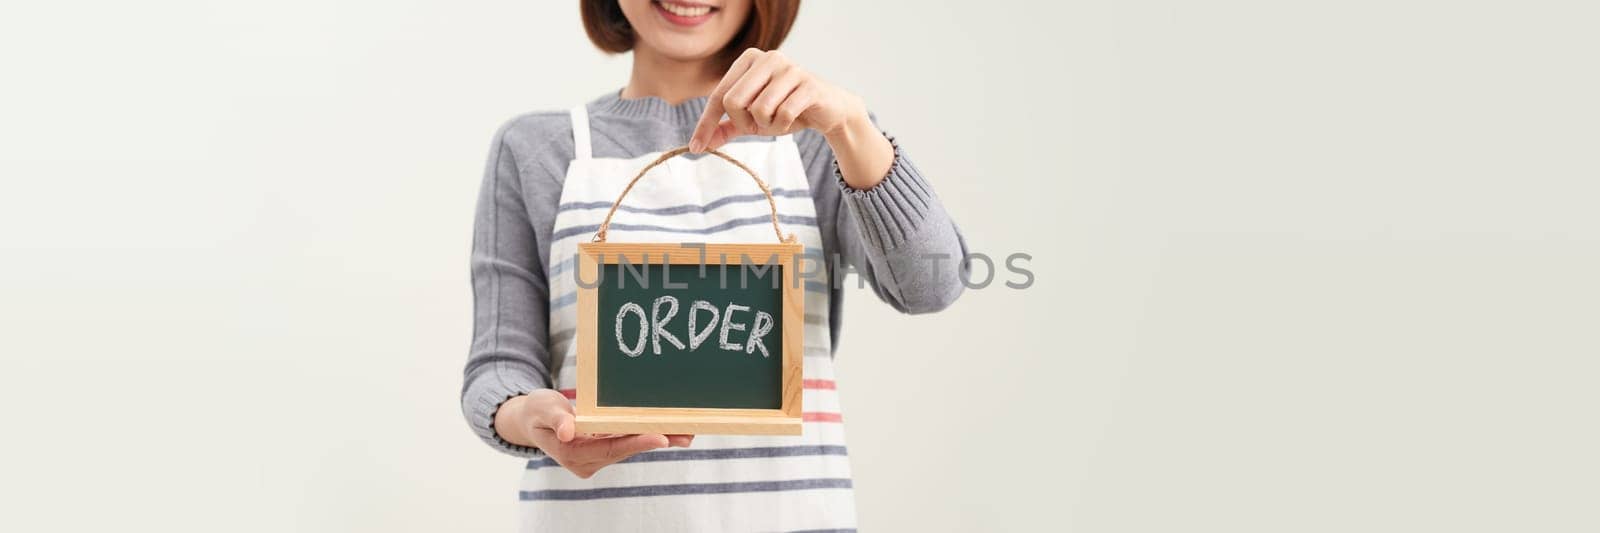  Hand of female entrepreneur with apron holding billboard, label or poster for ORDER by makidotvn